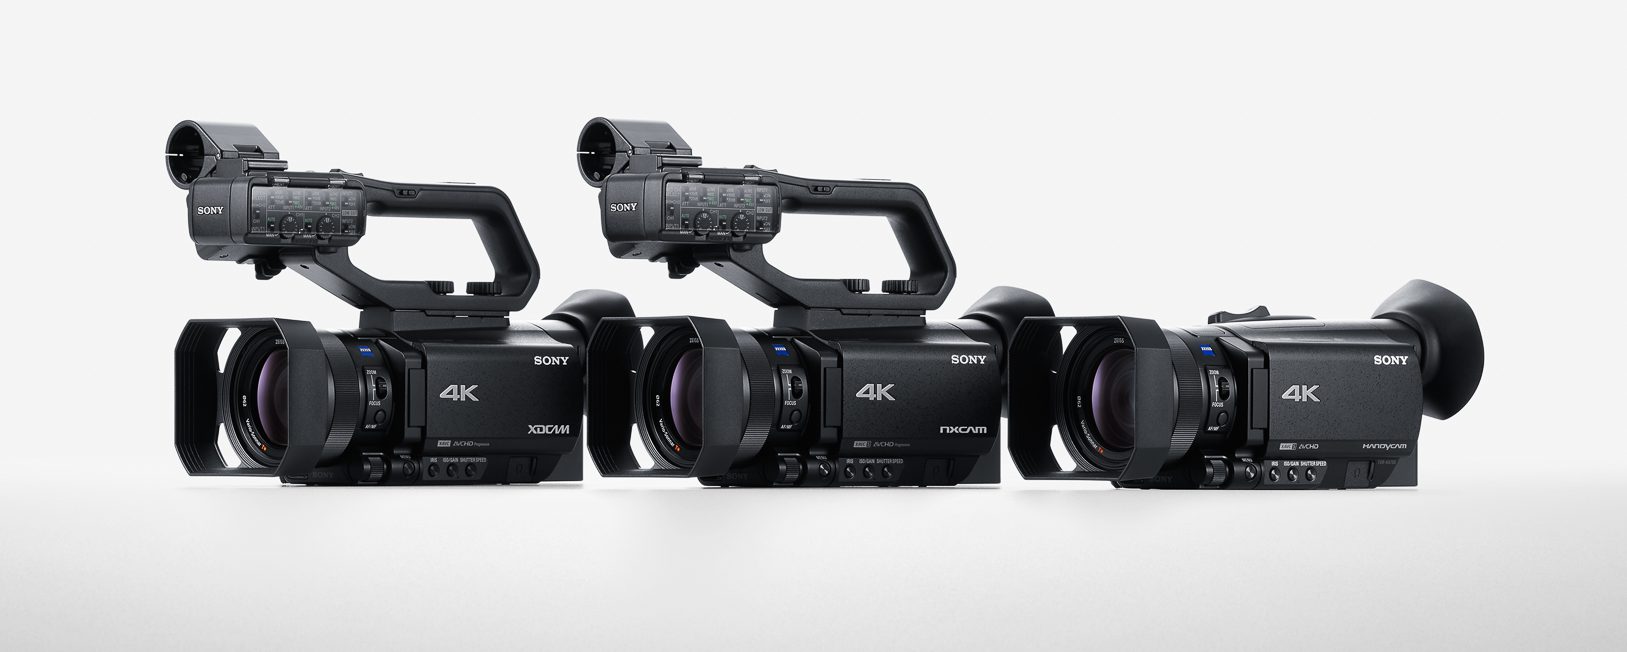 Traditional camcorders in the era of mirrorless/HDSLR cams 14